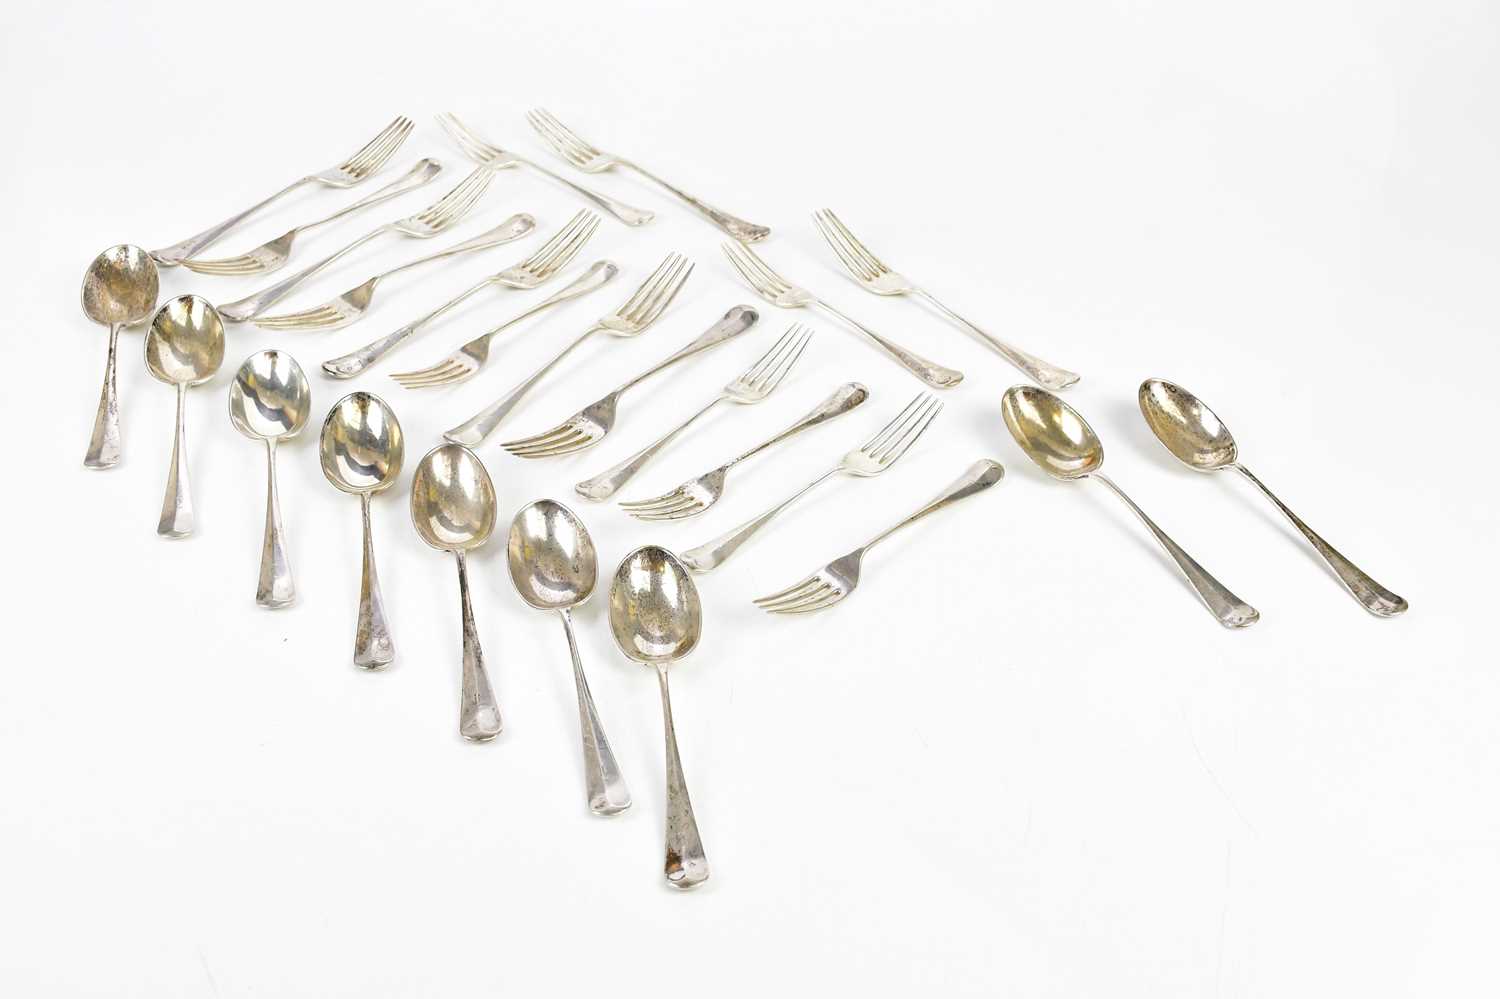 FINNIGANS LTD; a George V part set of Old English pattern and rat tail flatware, stamped Sheffield